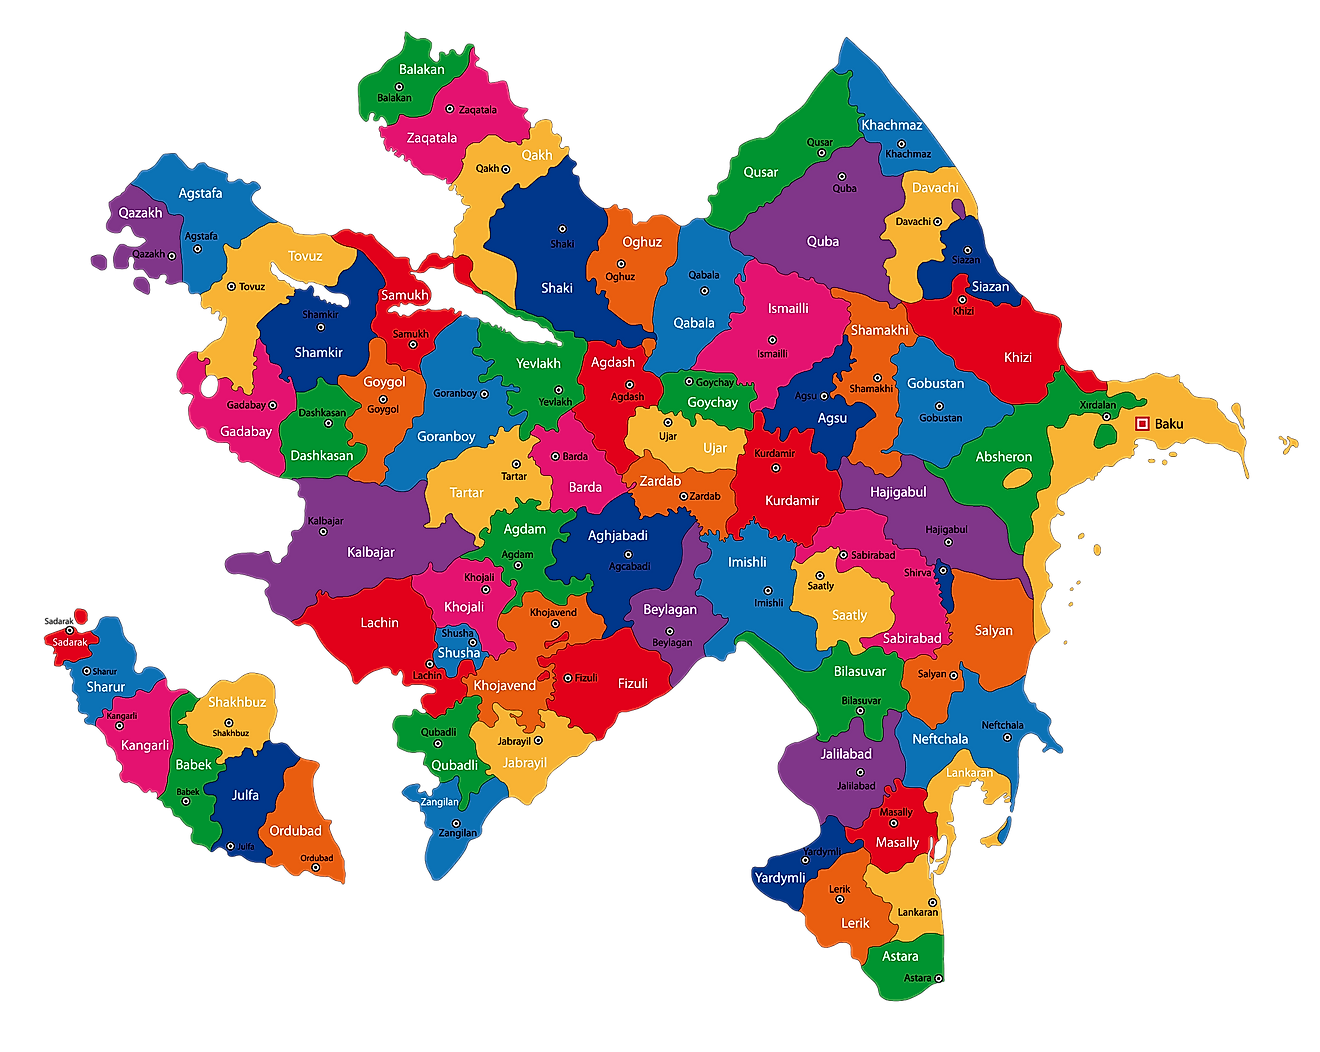 Political Map of Azerbaijan showing the 66 rayons and 11 cities including the national capital of Baku.